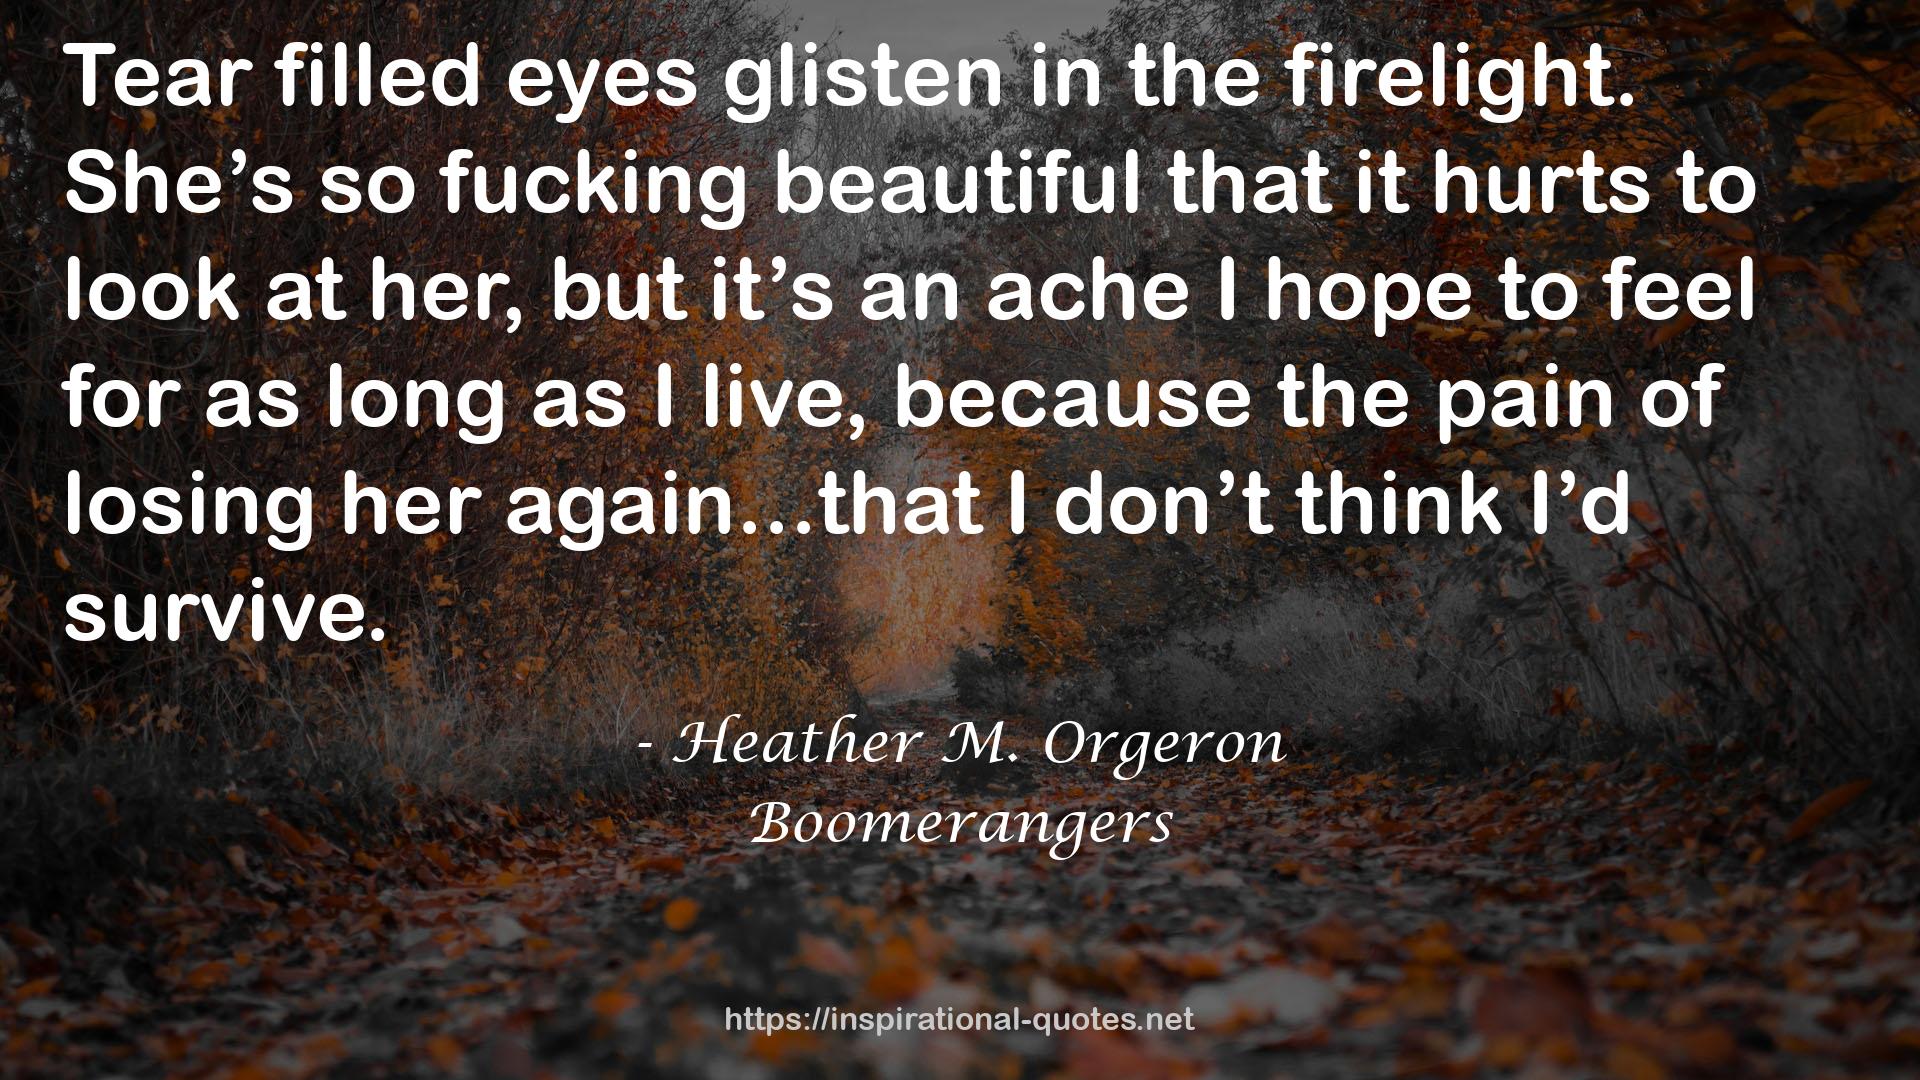 Heather M. Orgeron QUOTES